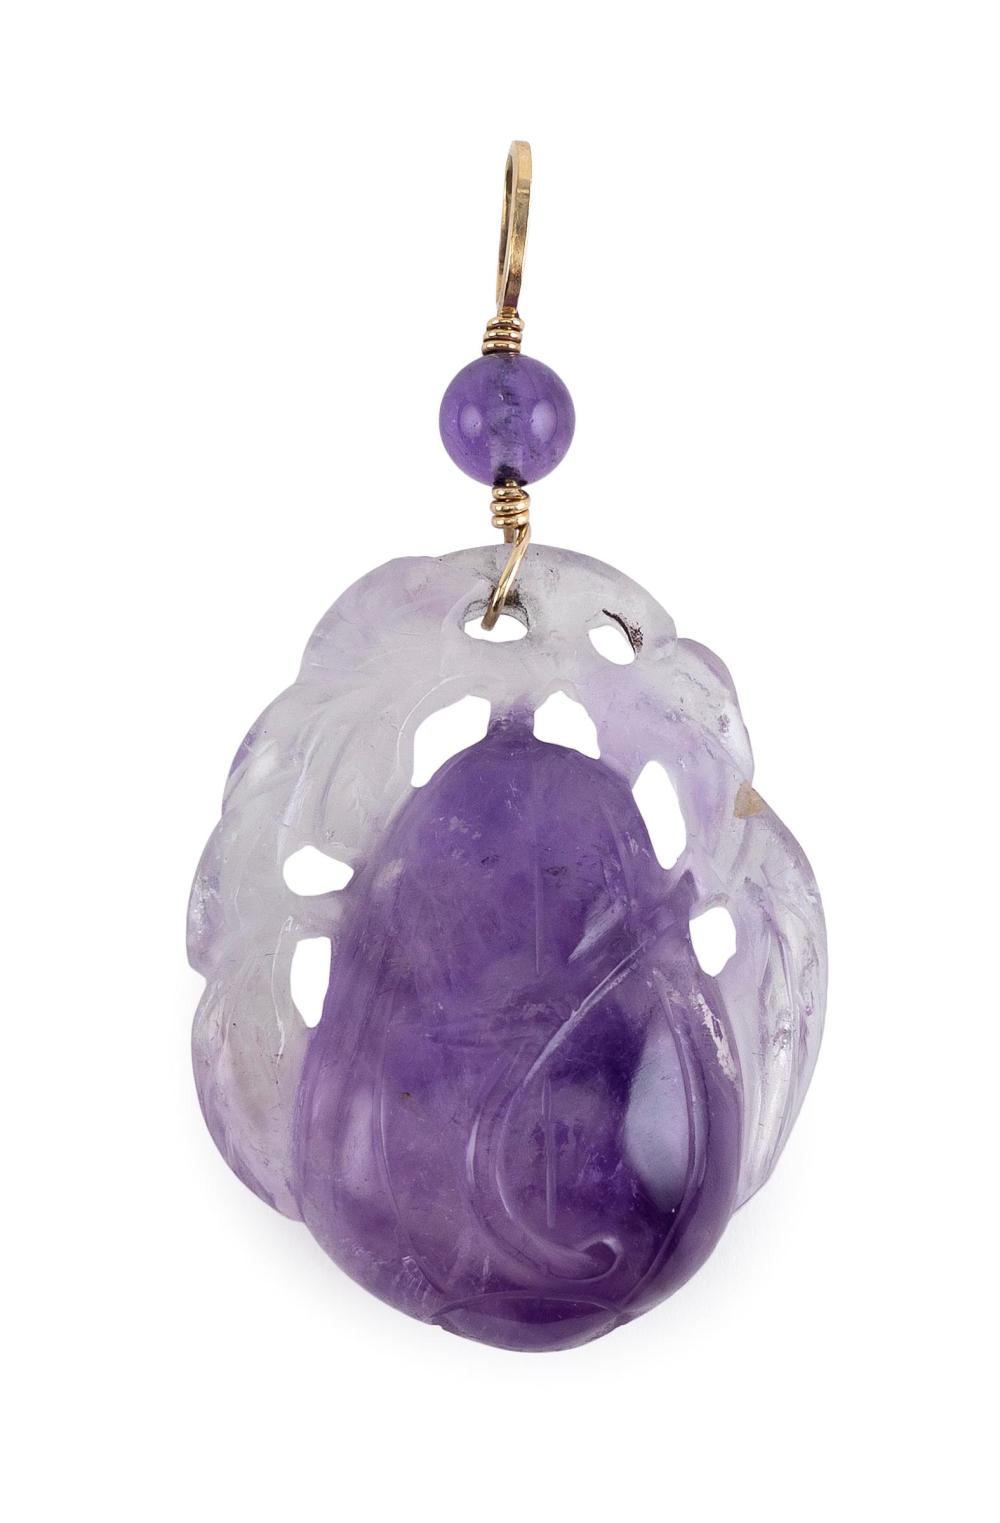 CHINESE CARVED AMETHYST PENDANT 351249